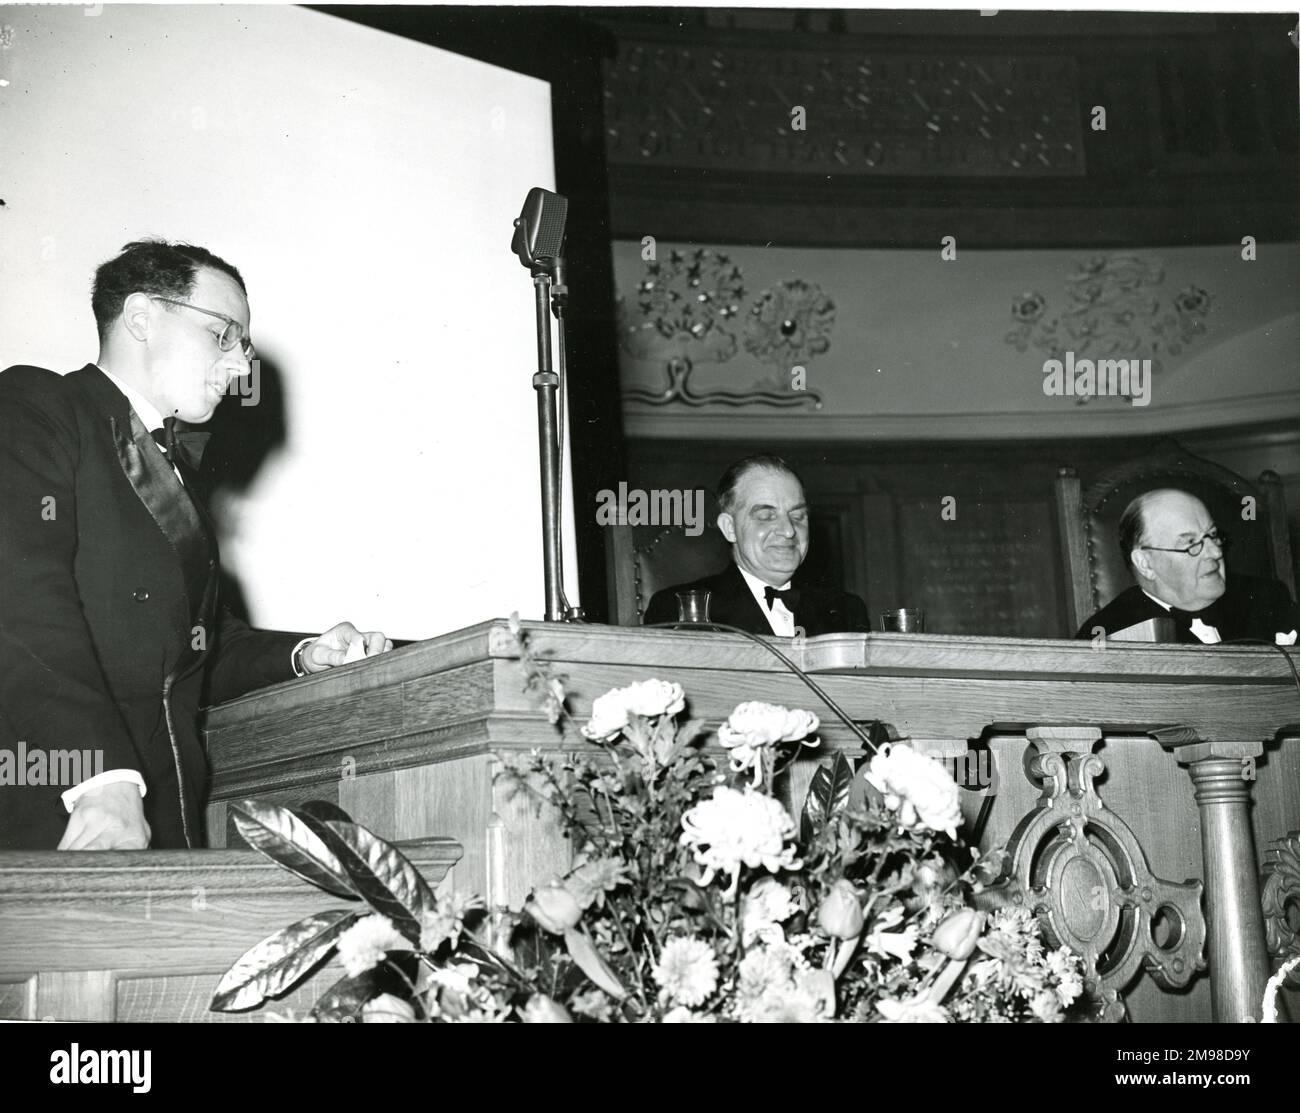 Peter Hearne, chairman of the Graduates? and Students? Section, left, seconds the vote of thanks at the fourth Royal Aeronautical Society President?s address and reception at the Assembly Hall, Church House, Westminster, London, on 10 January 1957. Stock Photo